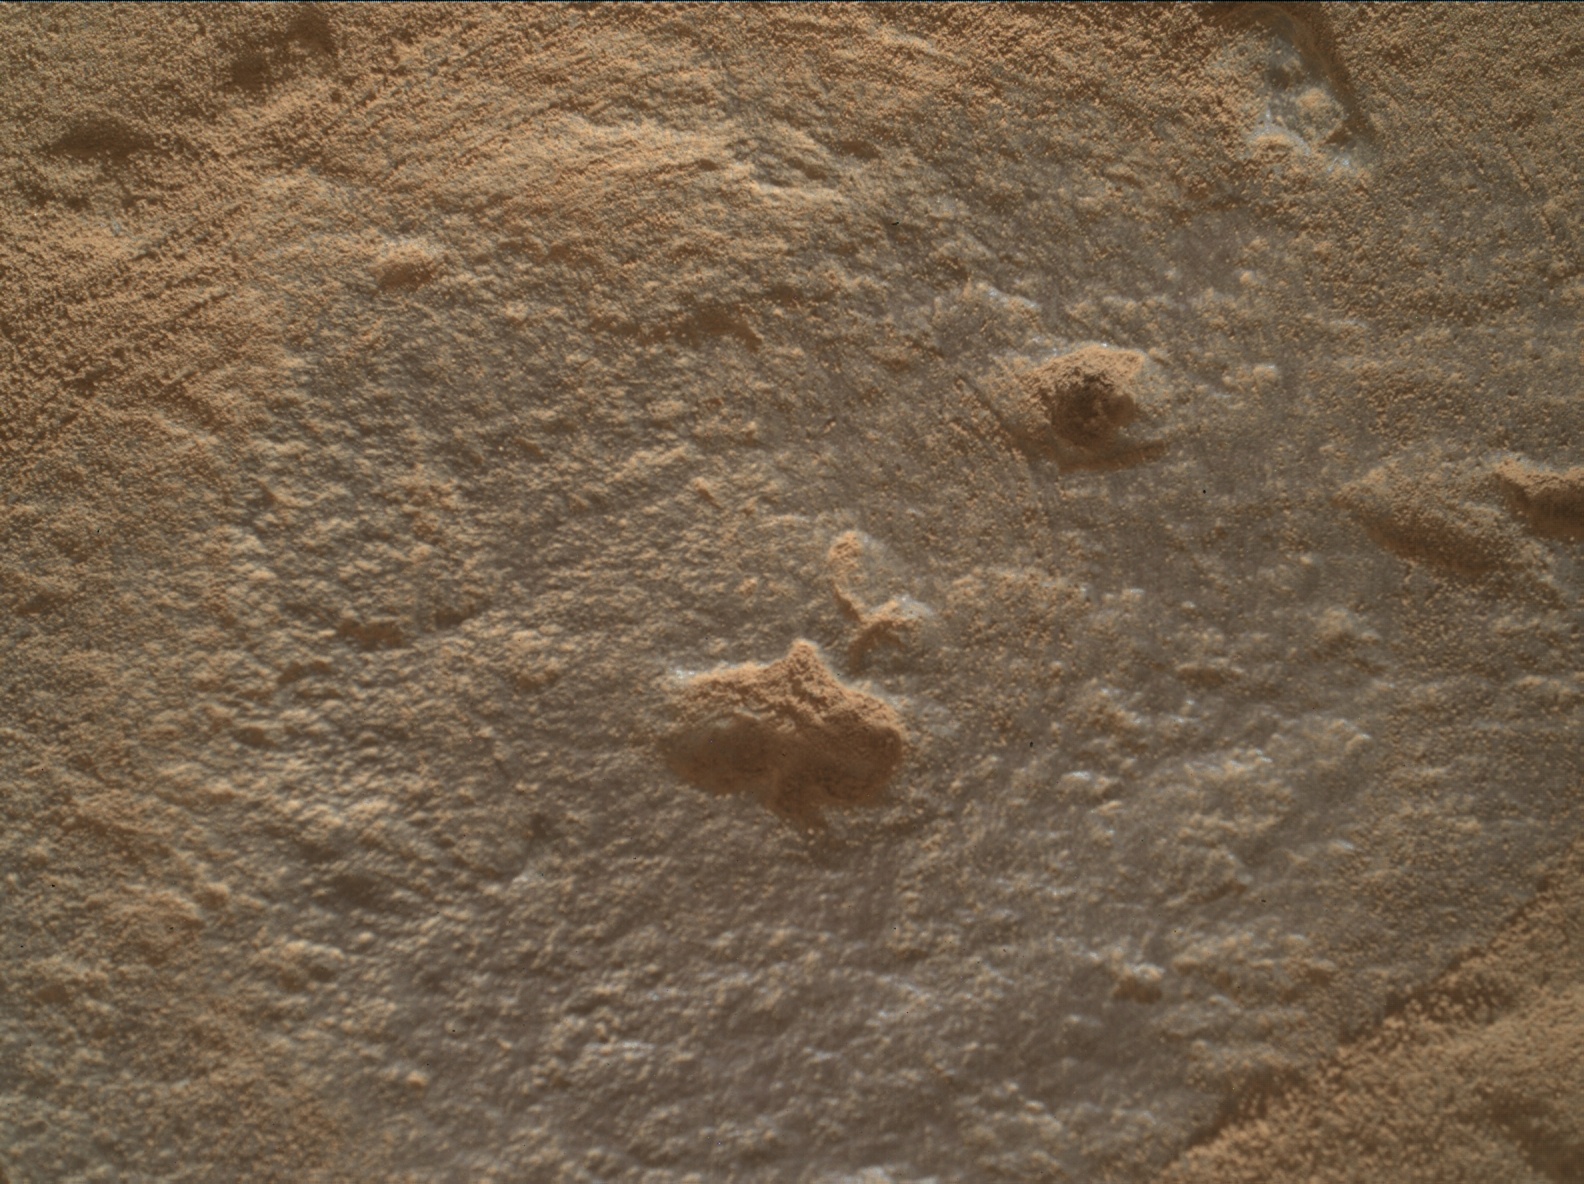 Nasa's Mars rover Curiosity acquired this image using its Mars Hand Lens Imager (MAHLI) on Sol 3716